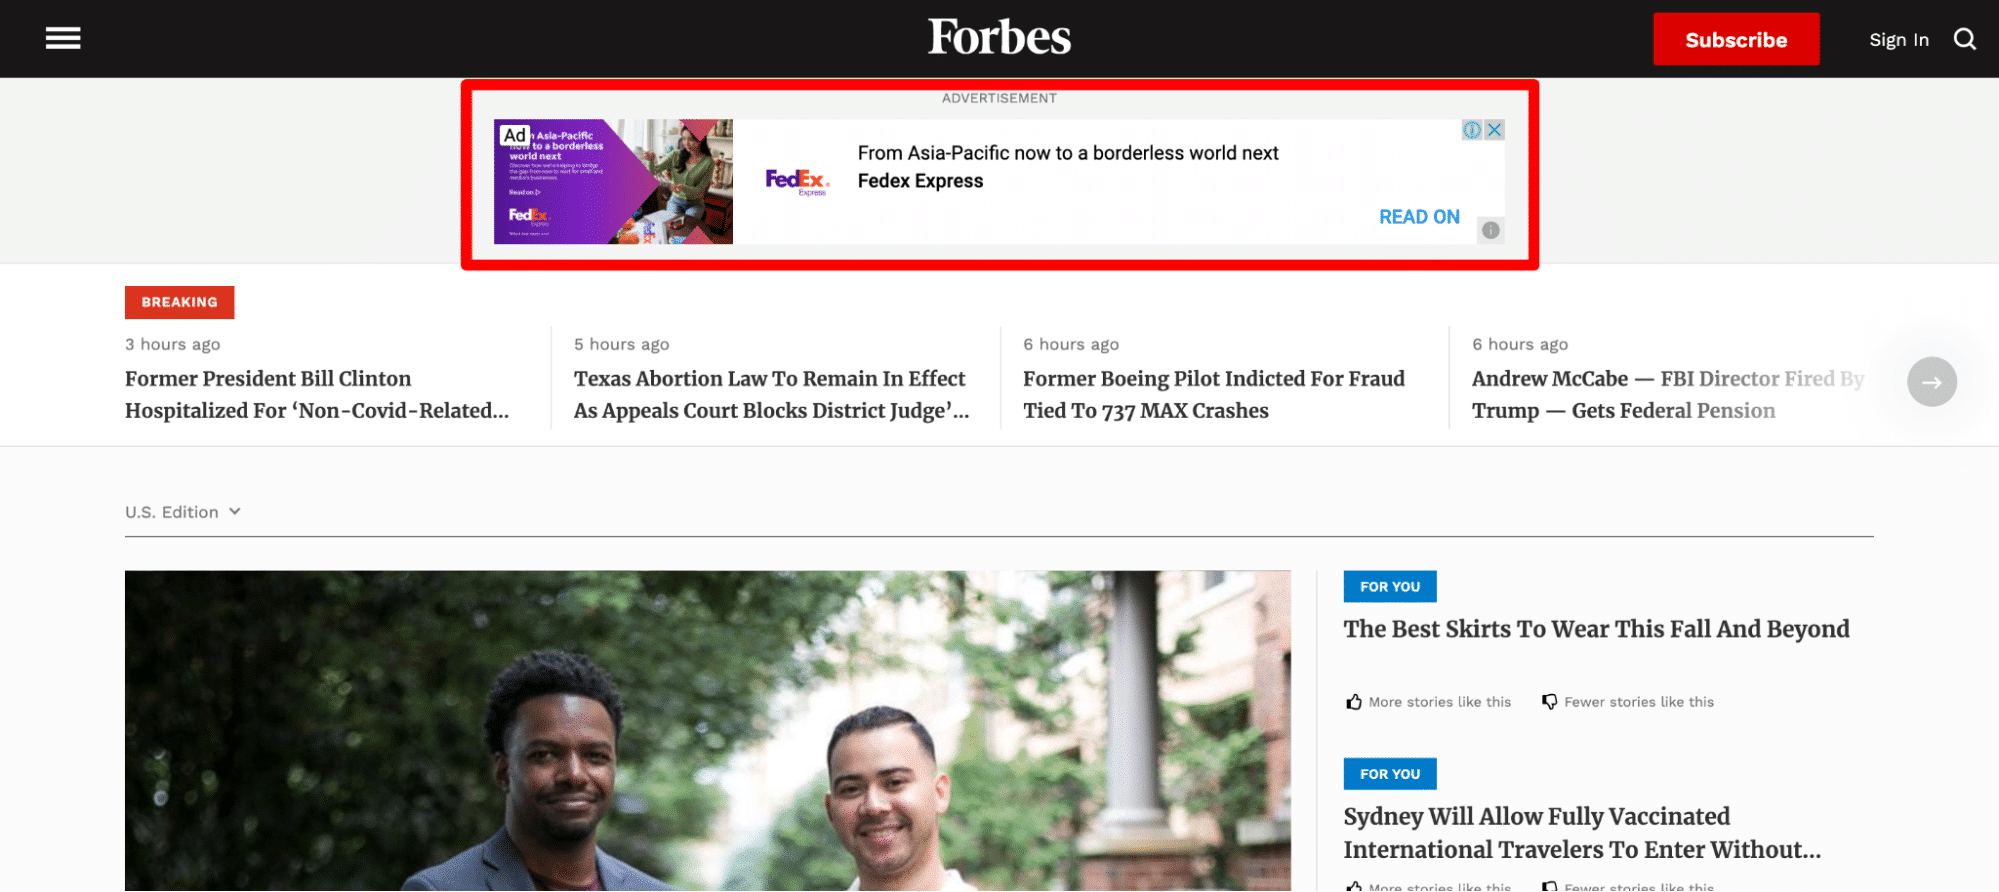 The Forbes homepage with a banner ad boxed in red